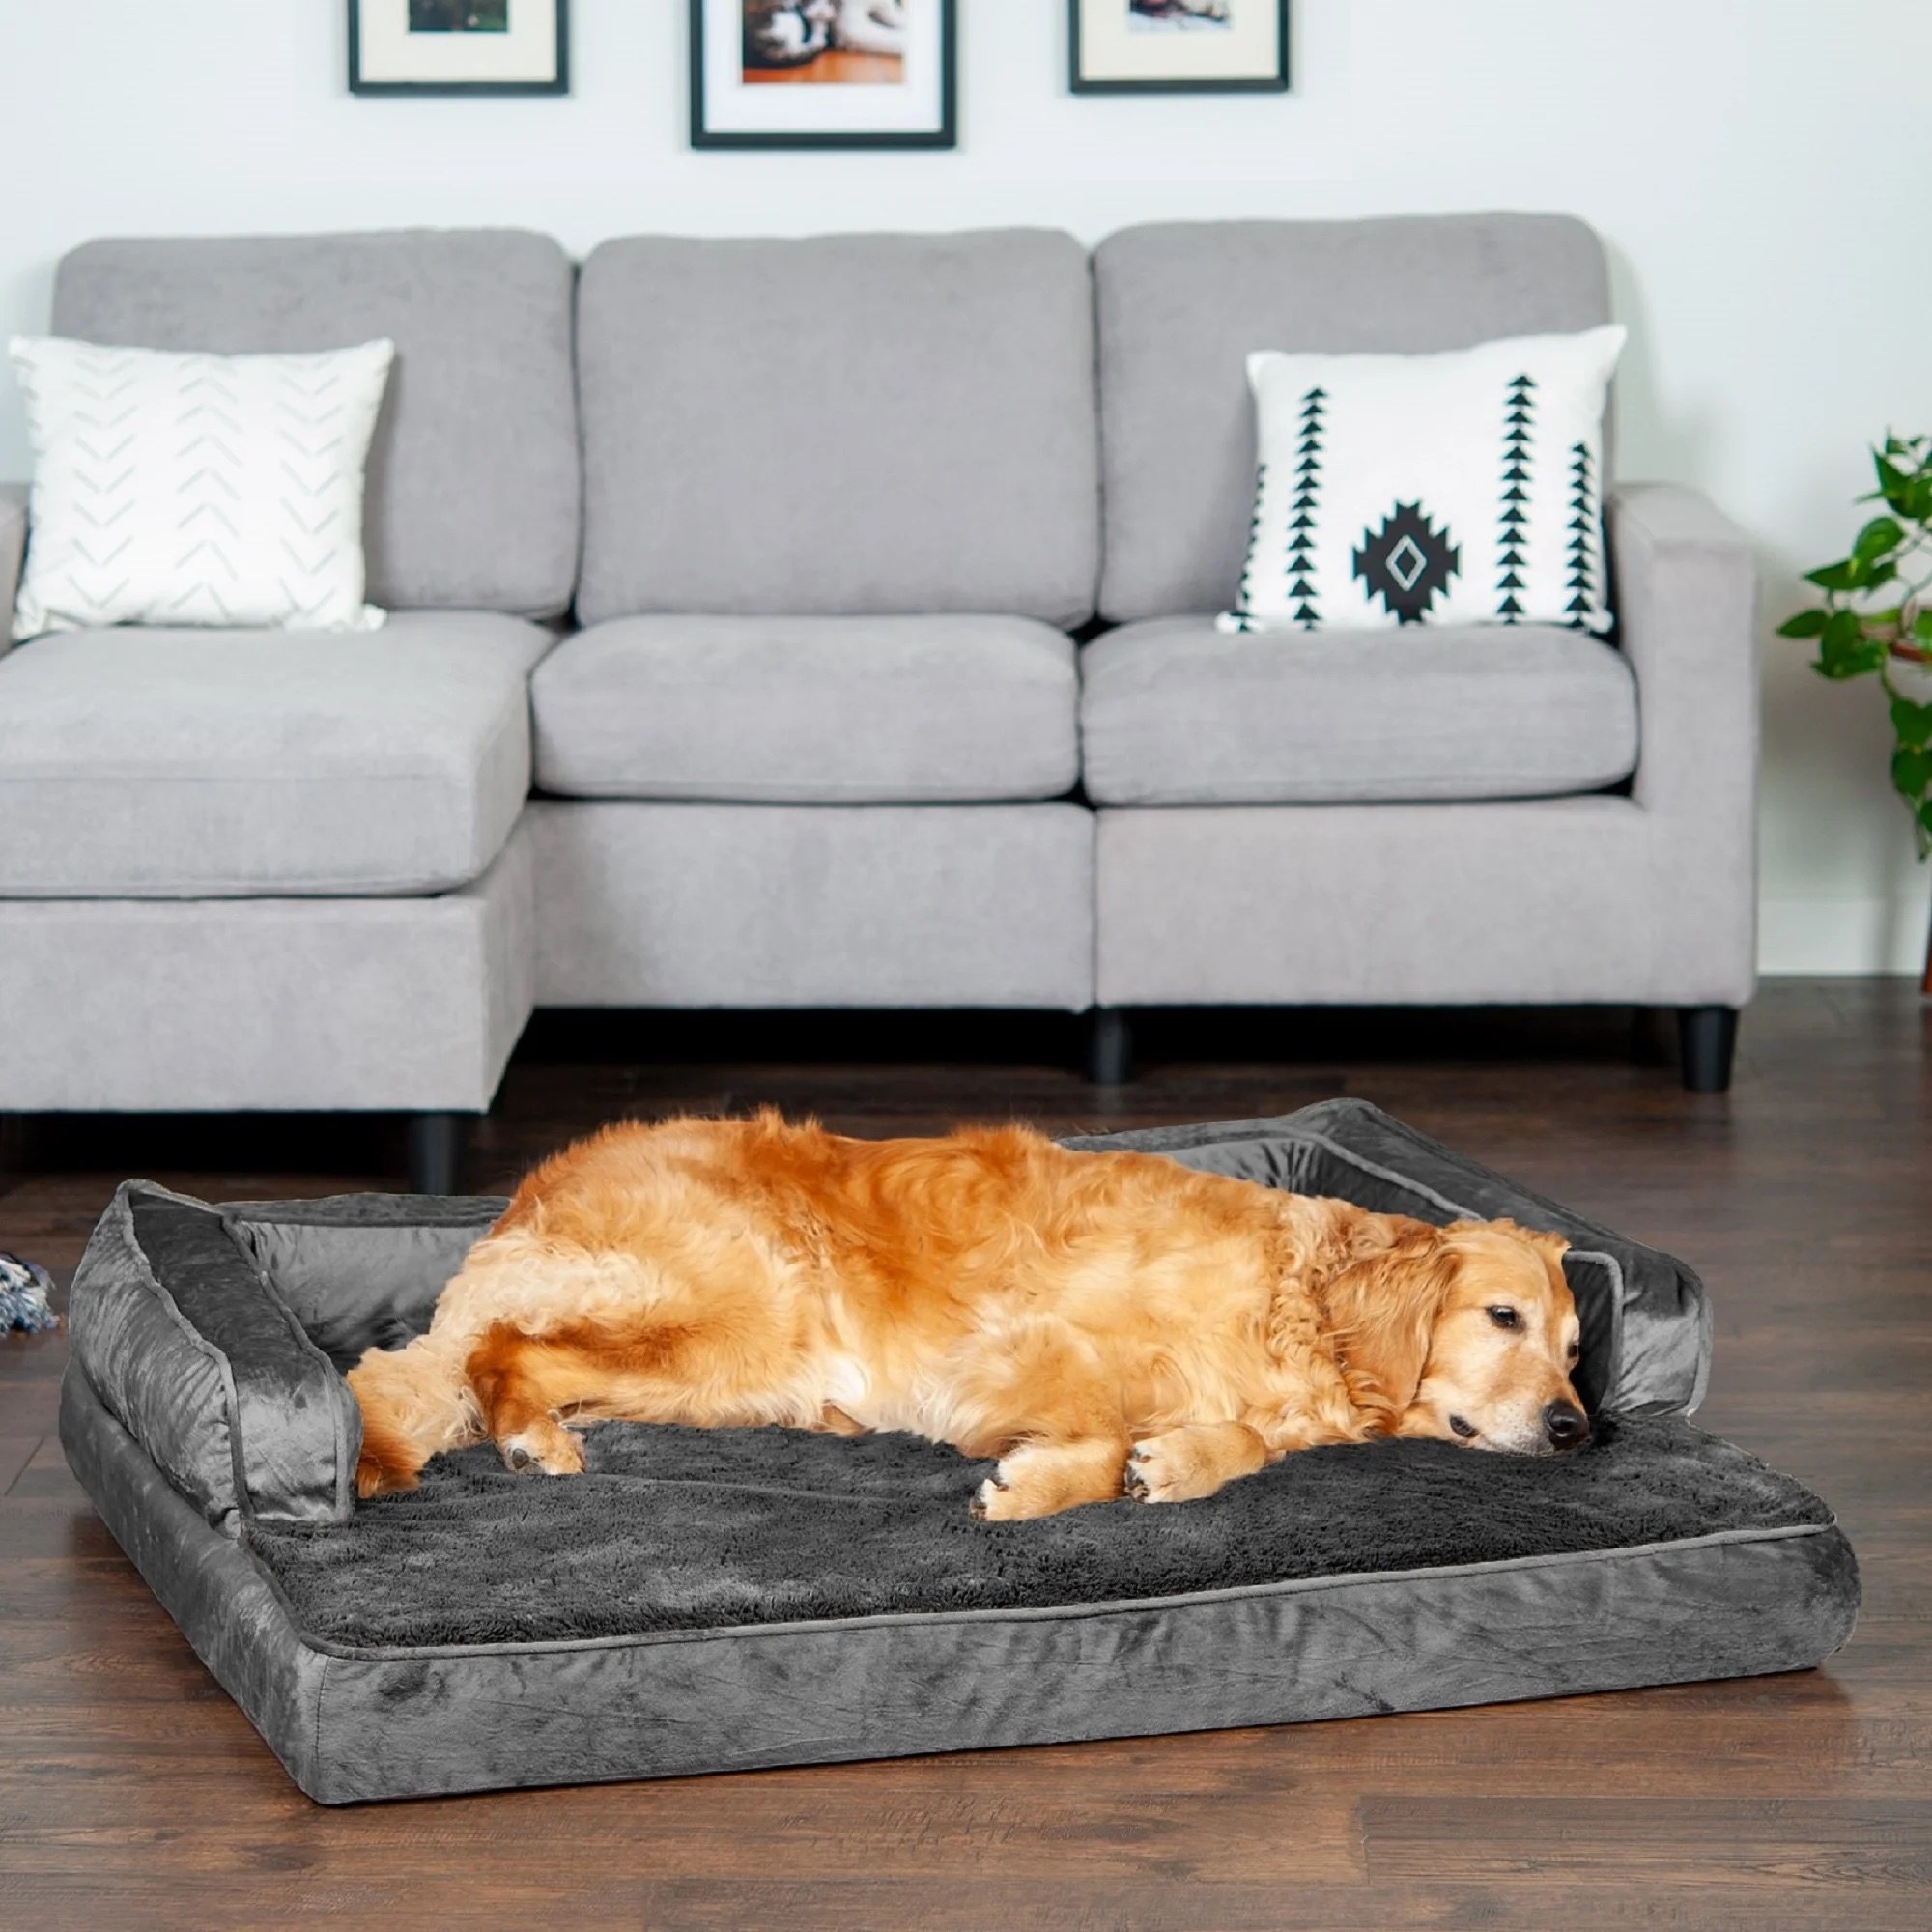 a golden retriever on a dark gray dog bed in a living room